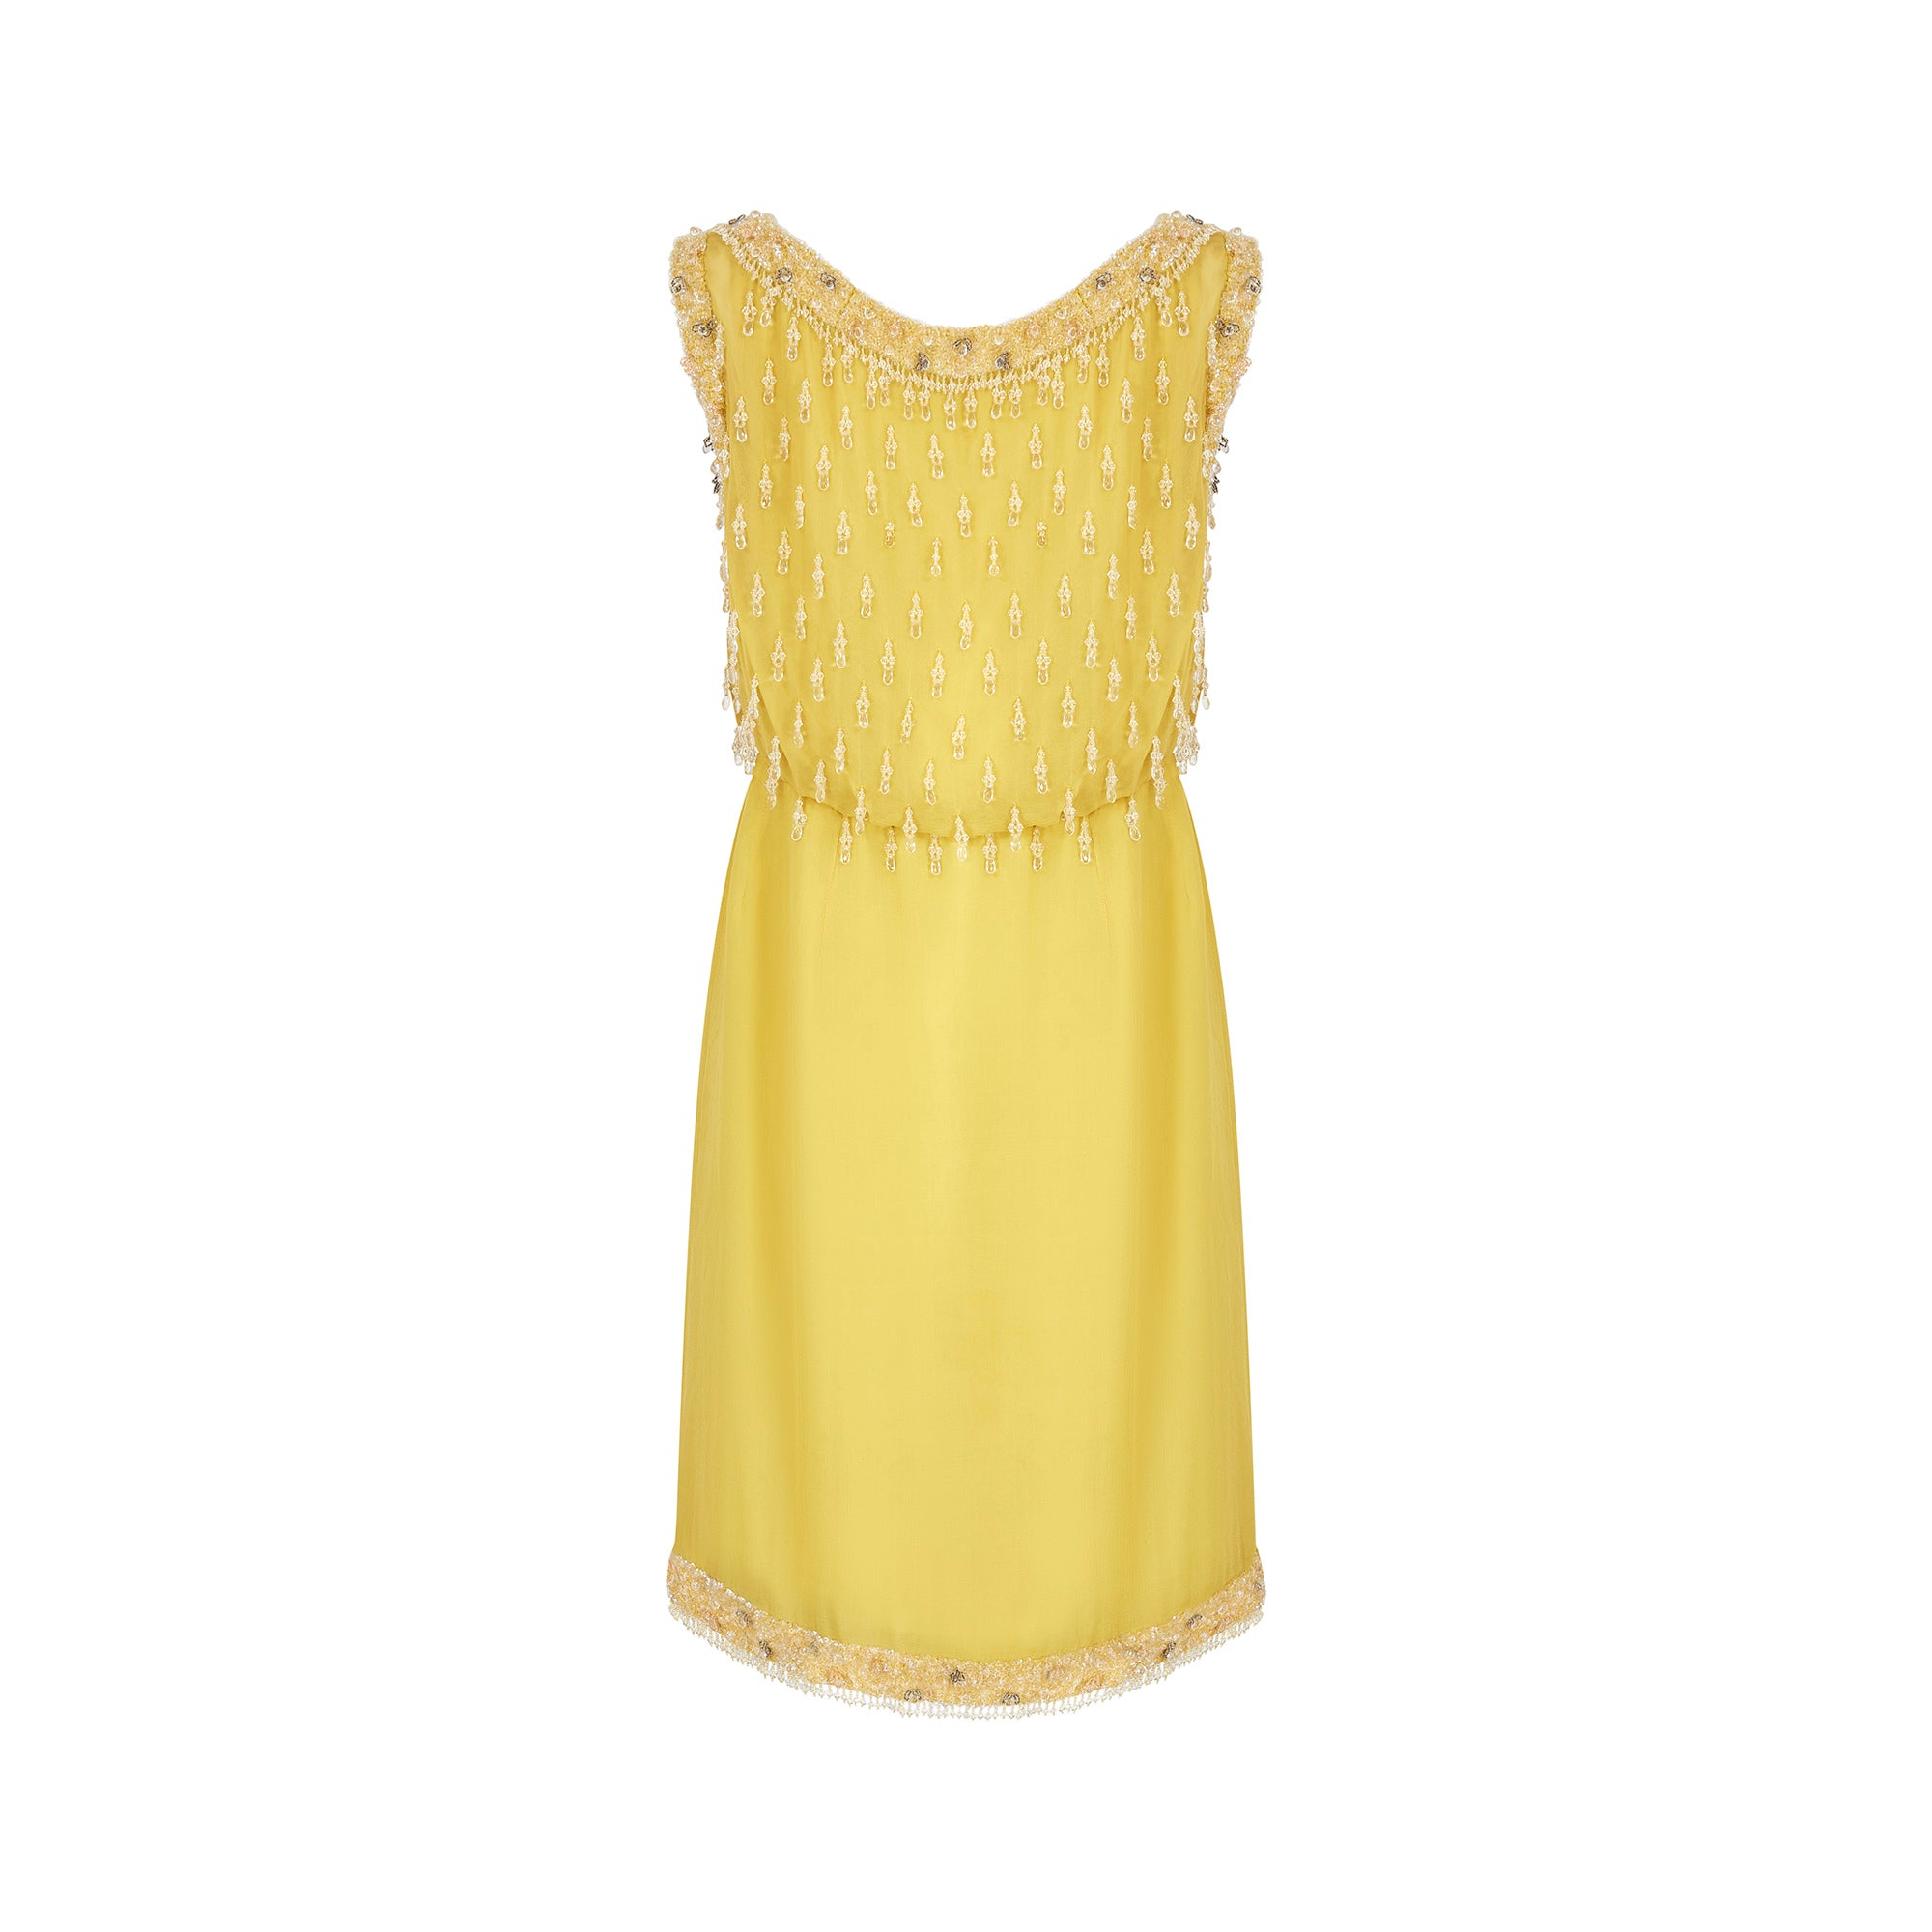 1960s French Couture Yellow Silk Chiffon Sequin Beaded Dress